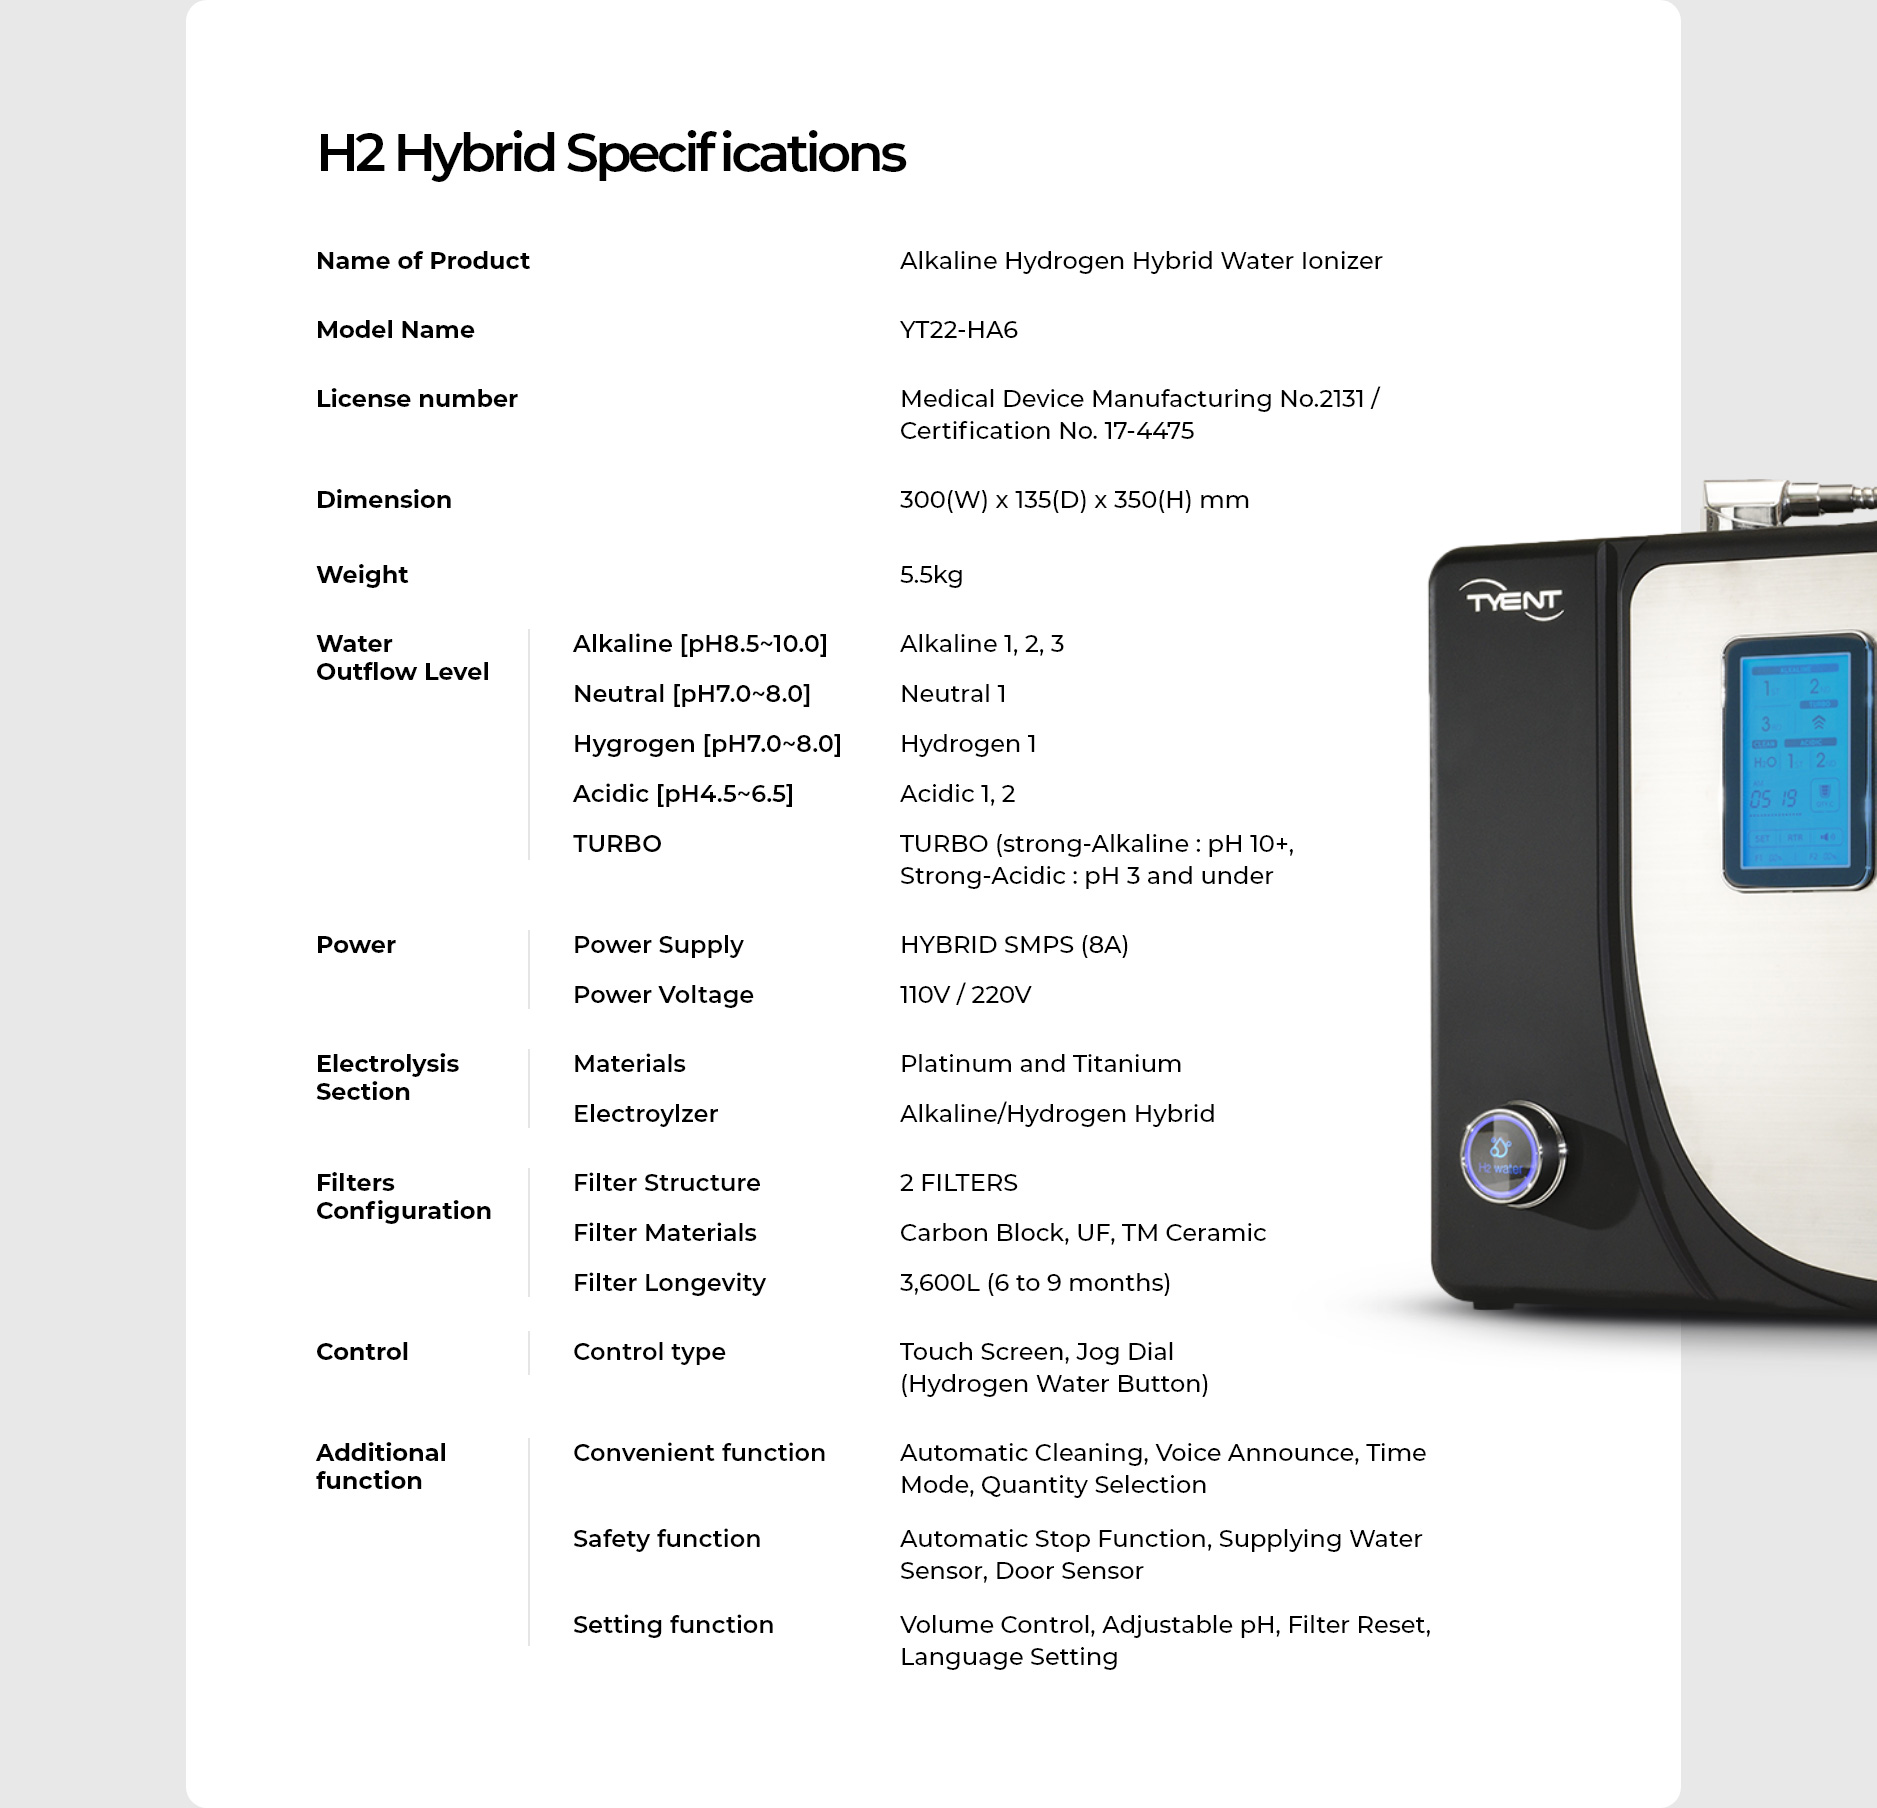 H2 Hybrid Specifications